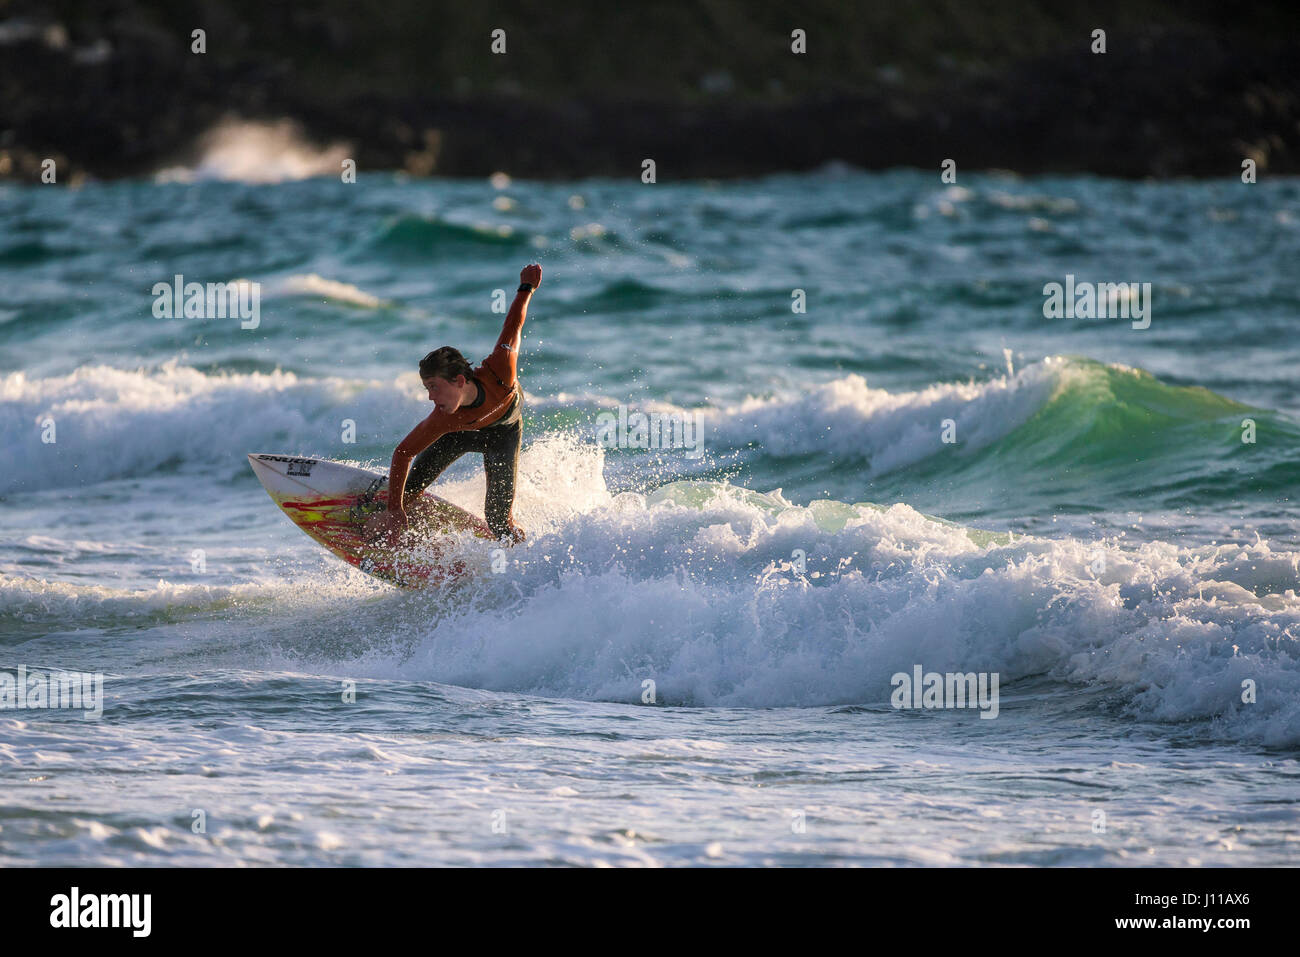 Surfing UK; Surfer; Fistral; Cornwall; Wave; Surf board; Sea; Spray; Watersport; Evening; Physical activity; Skill; Spectacular action; Leisure activi Stock Photo